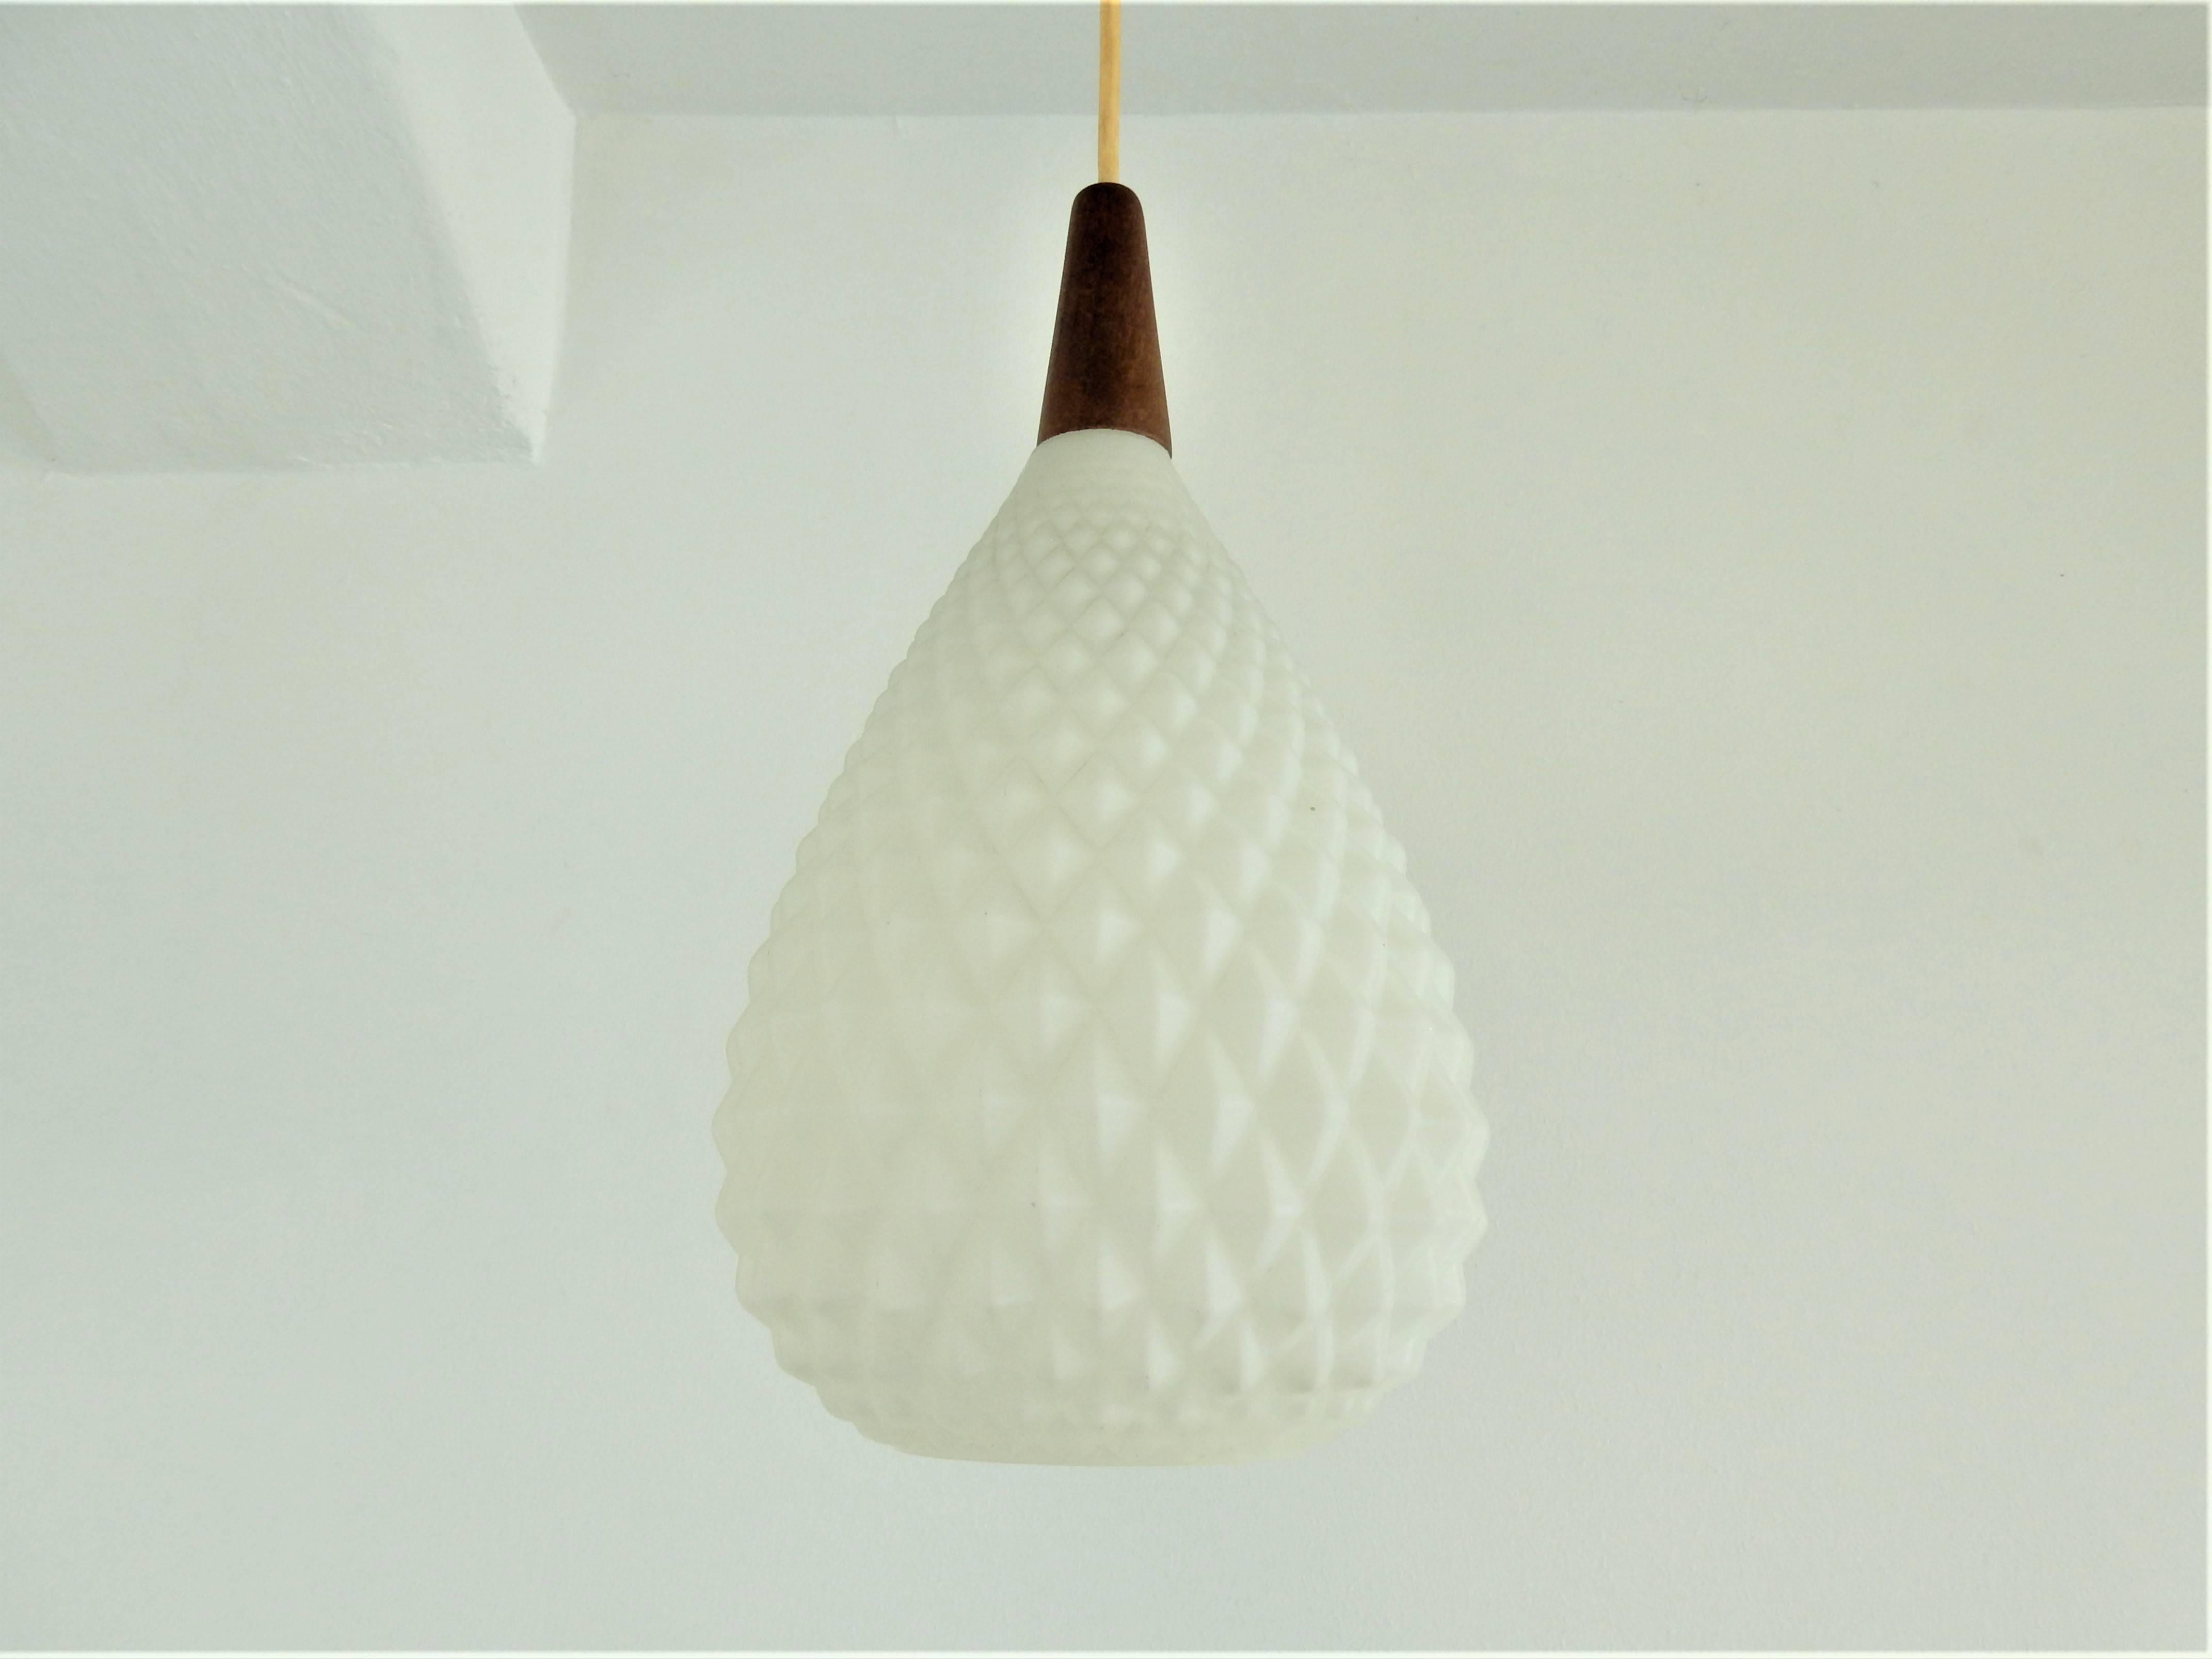 We imported this very nice pinecone shaped pendant lamp from Denmark. It is made of white opaline glass with a teak top. It is in a very good condition with minor signs of age and use.